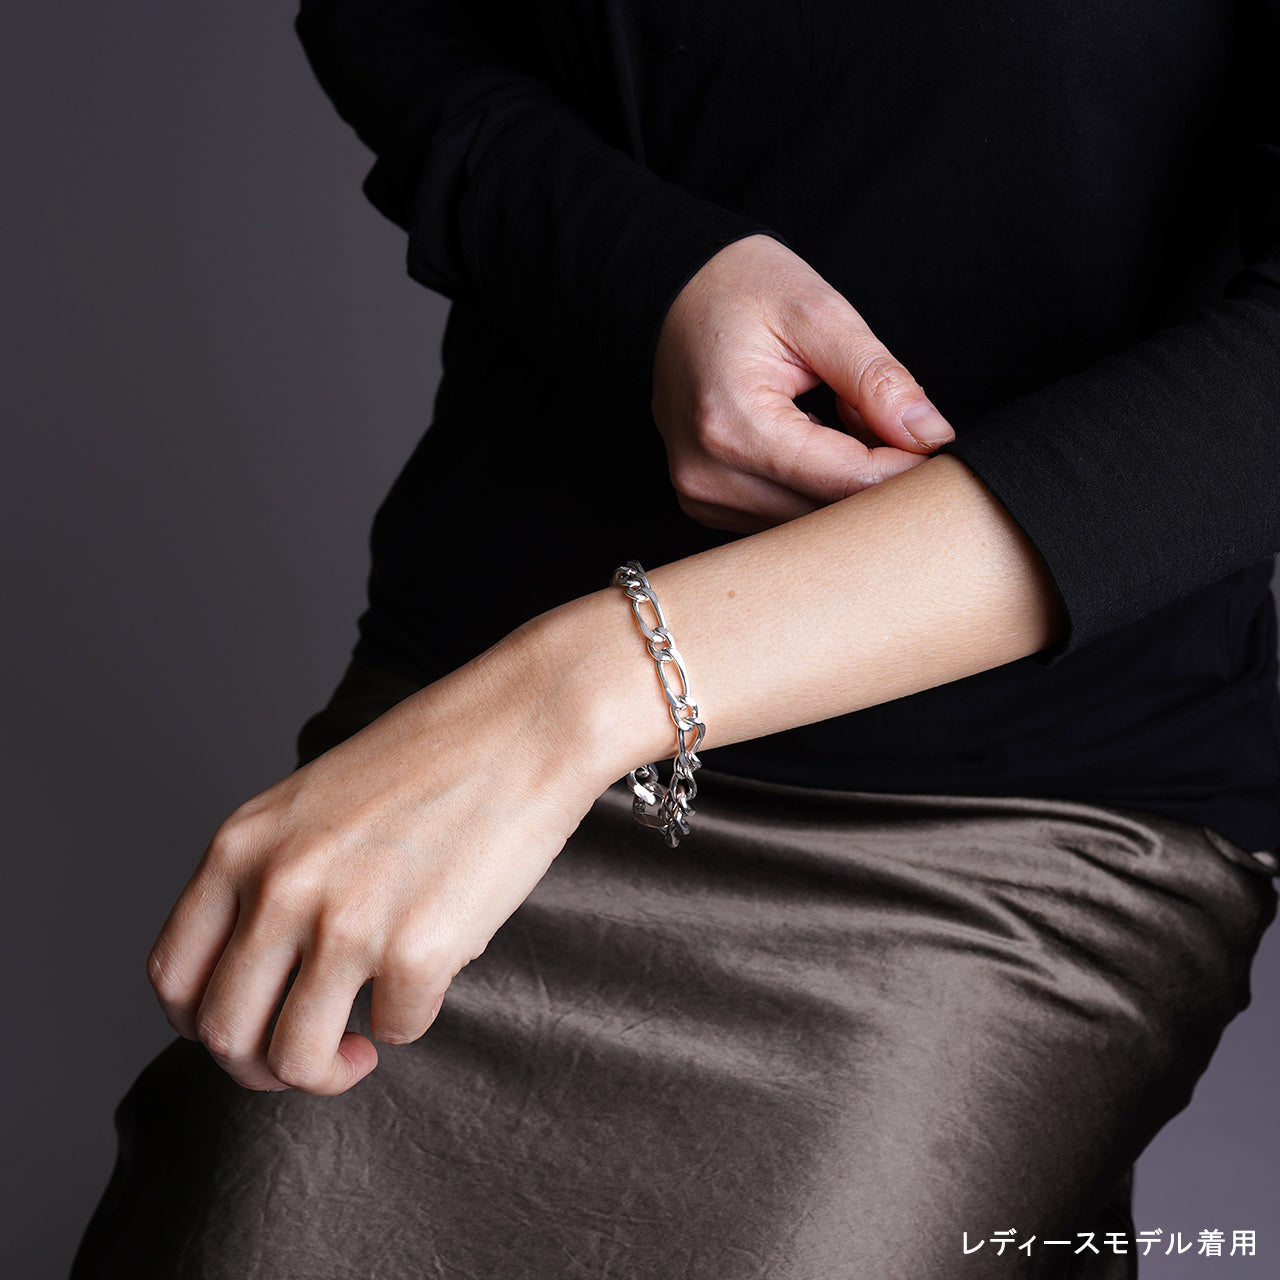 Garden of Eden ガーデンオブエデン シームレス カーブ リンク ブレス SEAMLESS CURB LINK BRACE シルバー925 アクセサリー  21AW-SCB01 21AW-SCB02 21AW-SCB03 【送料無料】